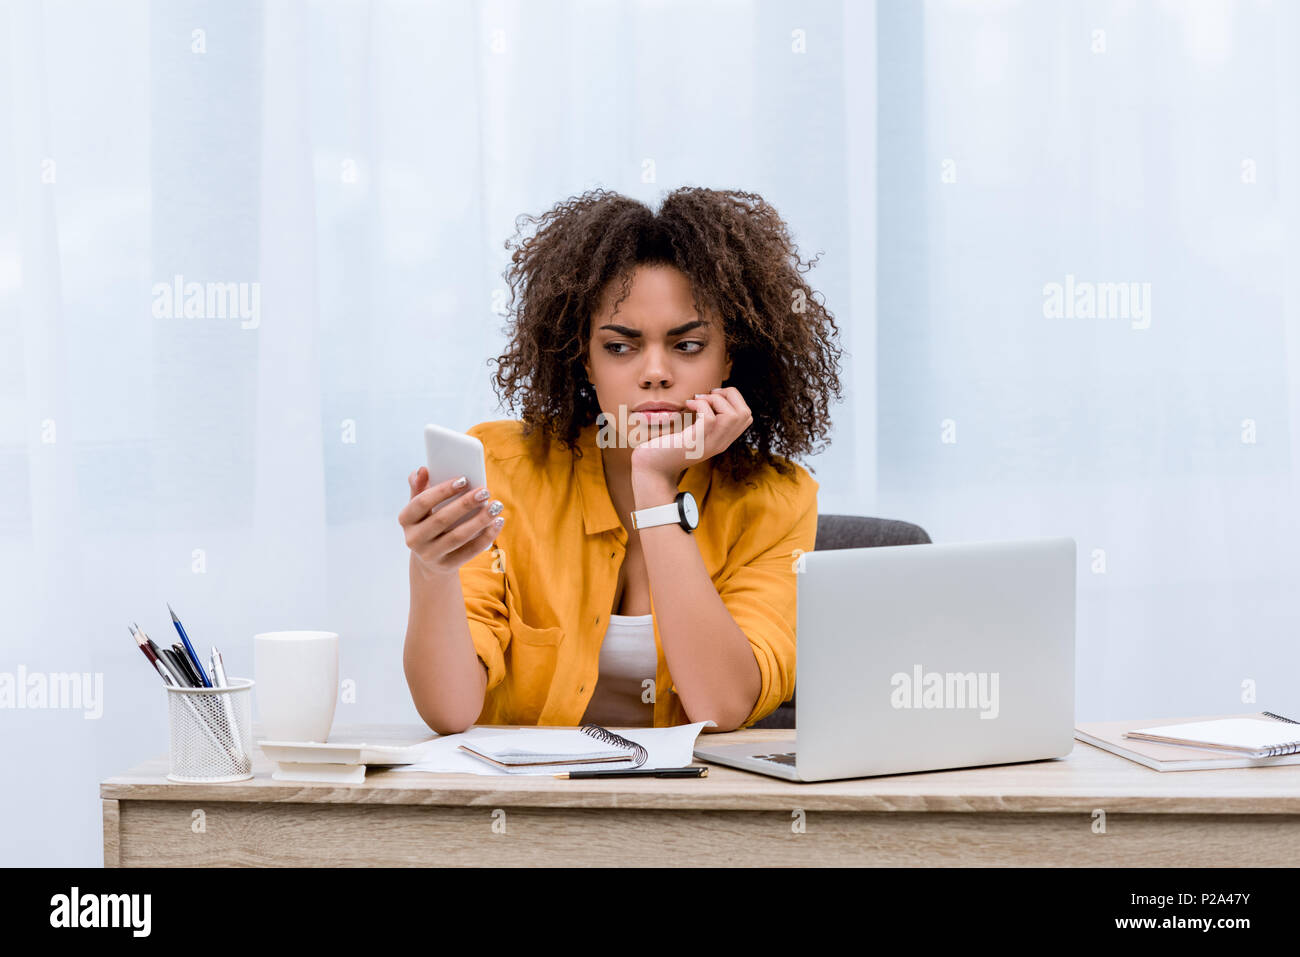 suspecting young woman looking at smartphone at workplace Stock Photo